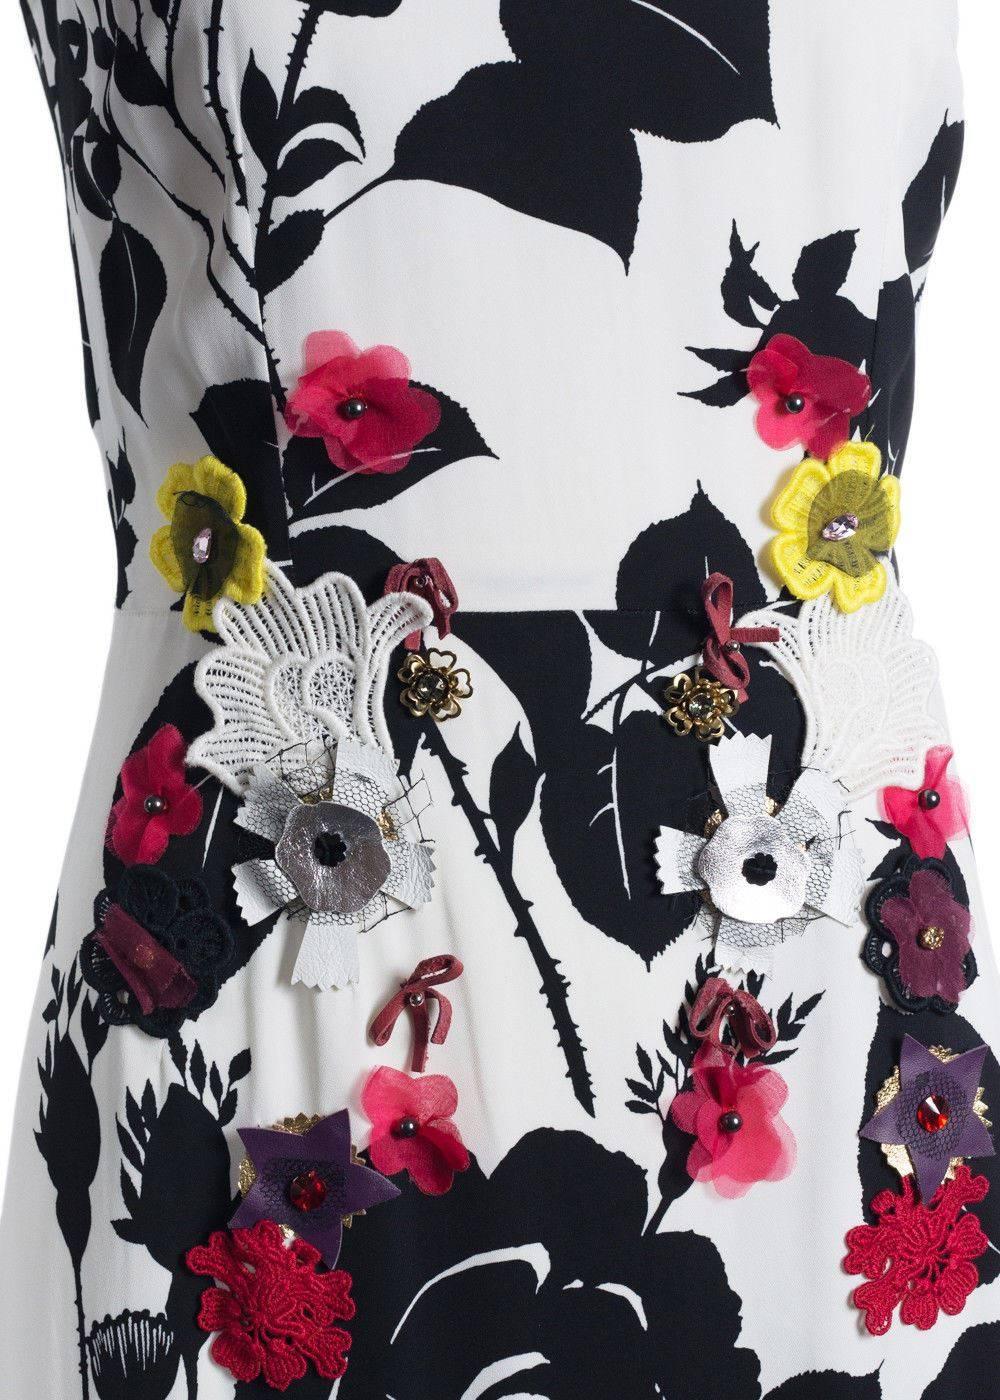 Gray Dolce & Gabbana Black and White Floral Embroidered Sleeveless Dress